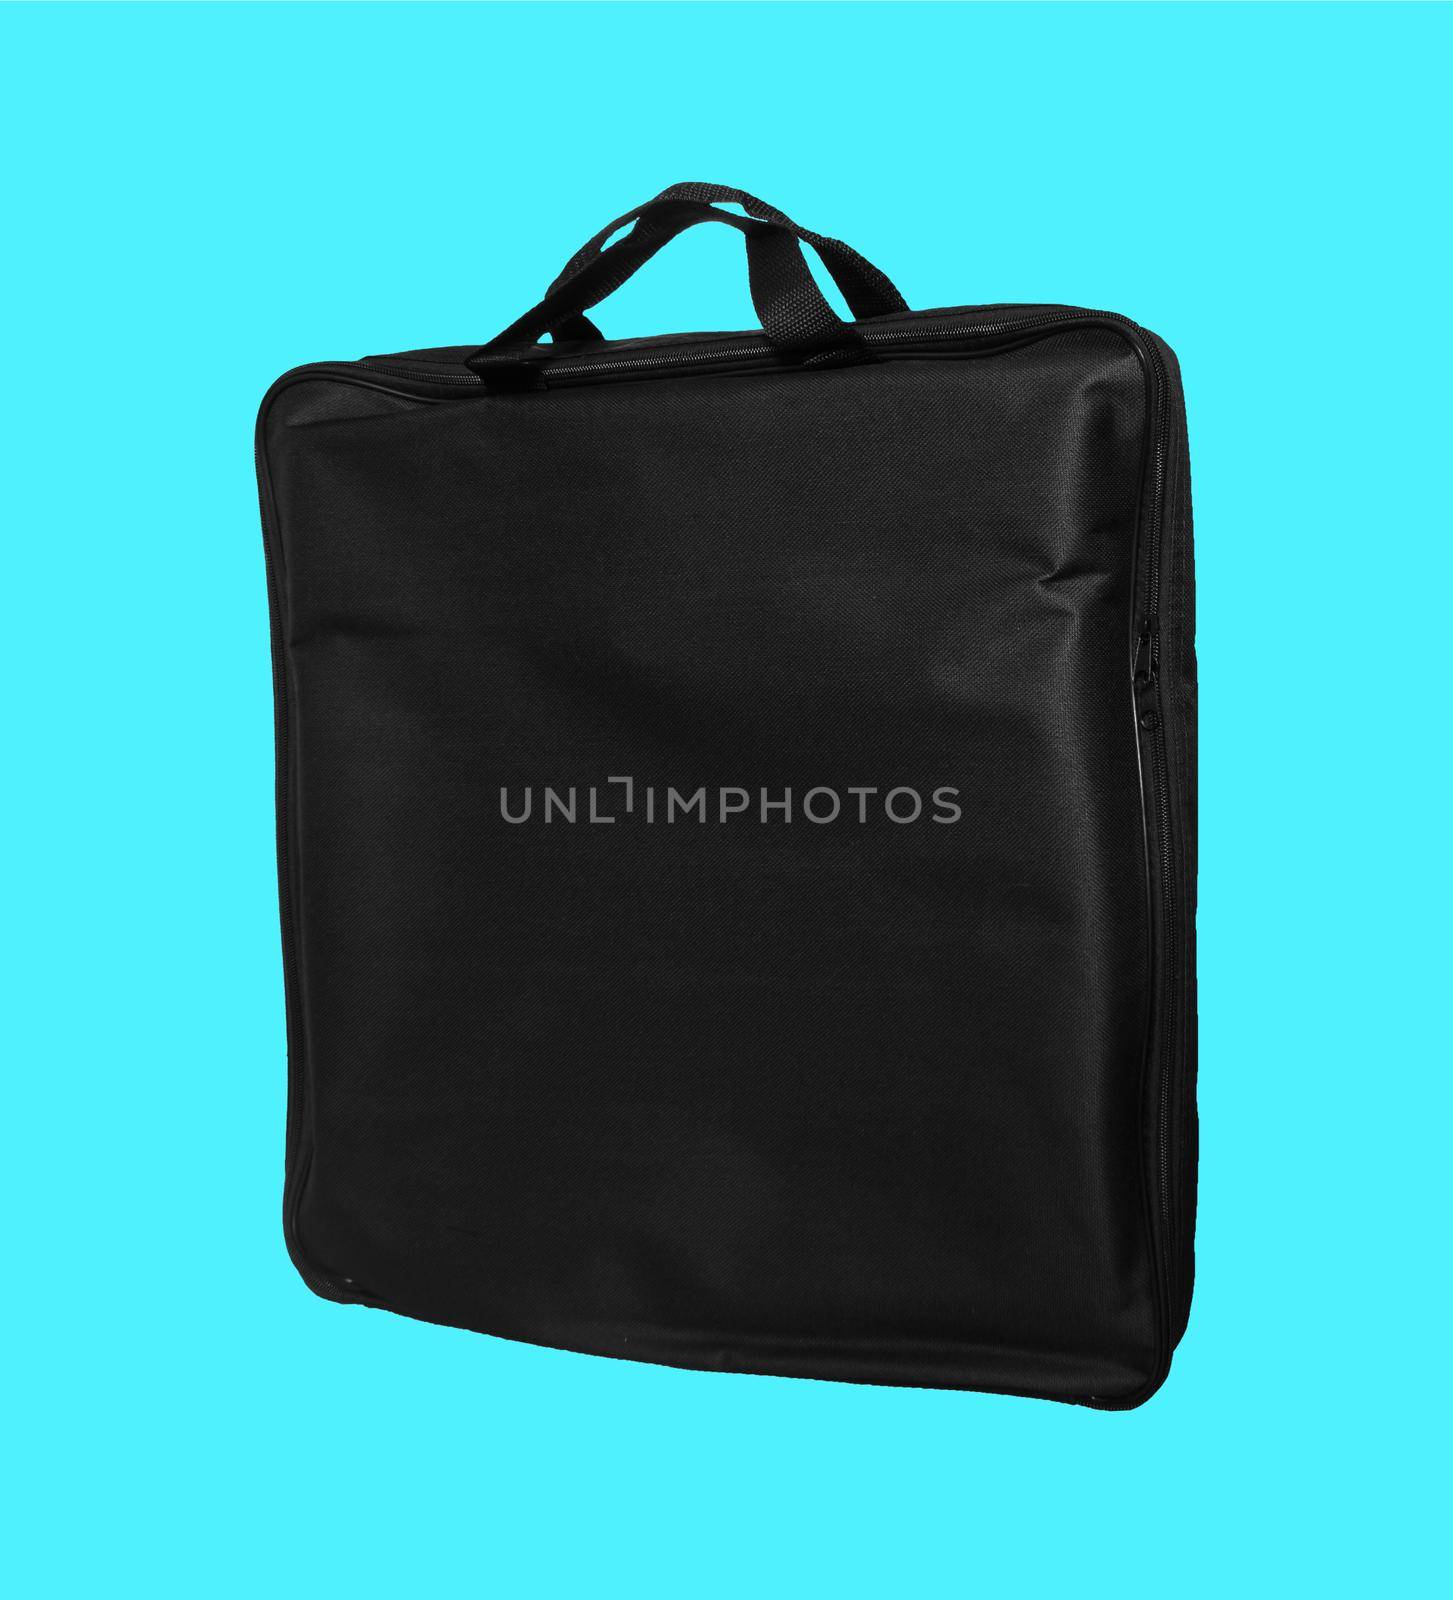 a simple bag made of material, black, for a laptop on a blue background